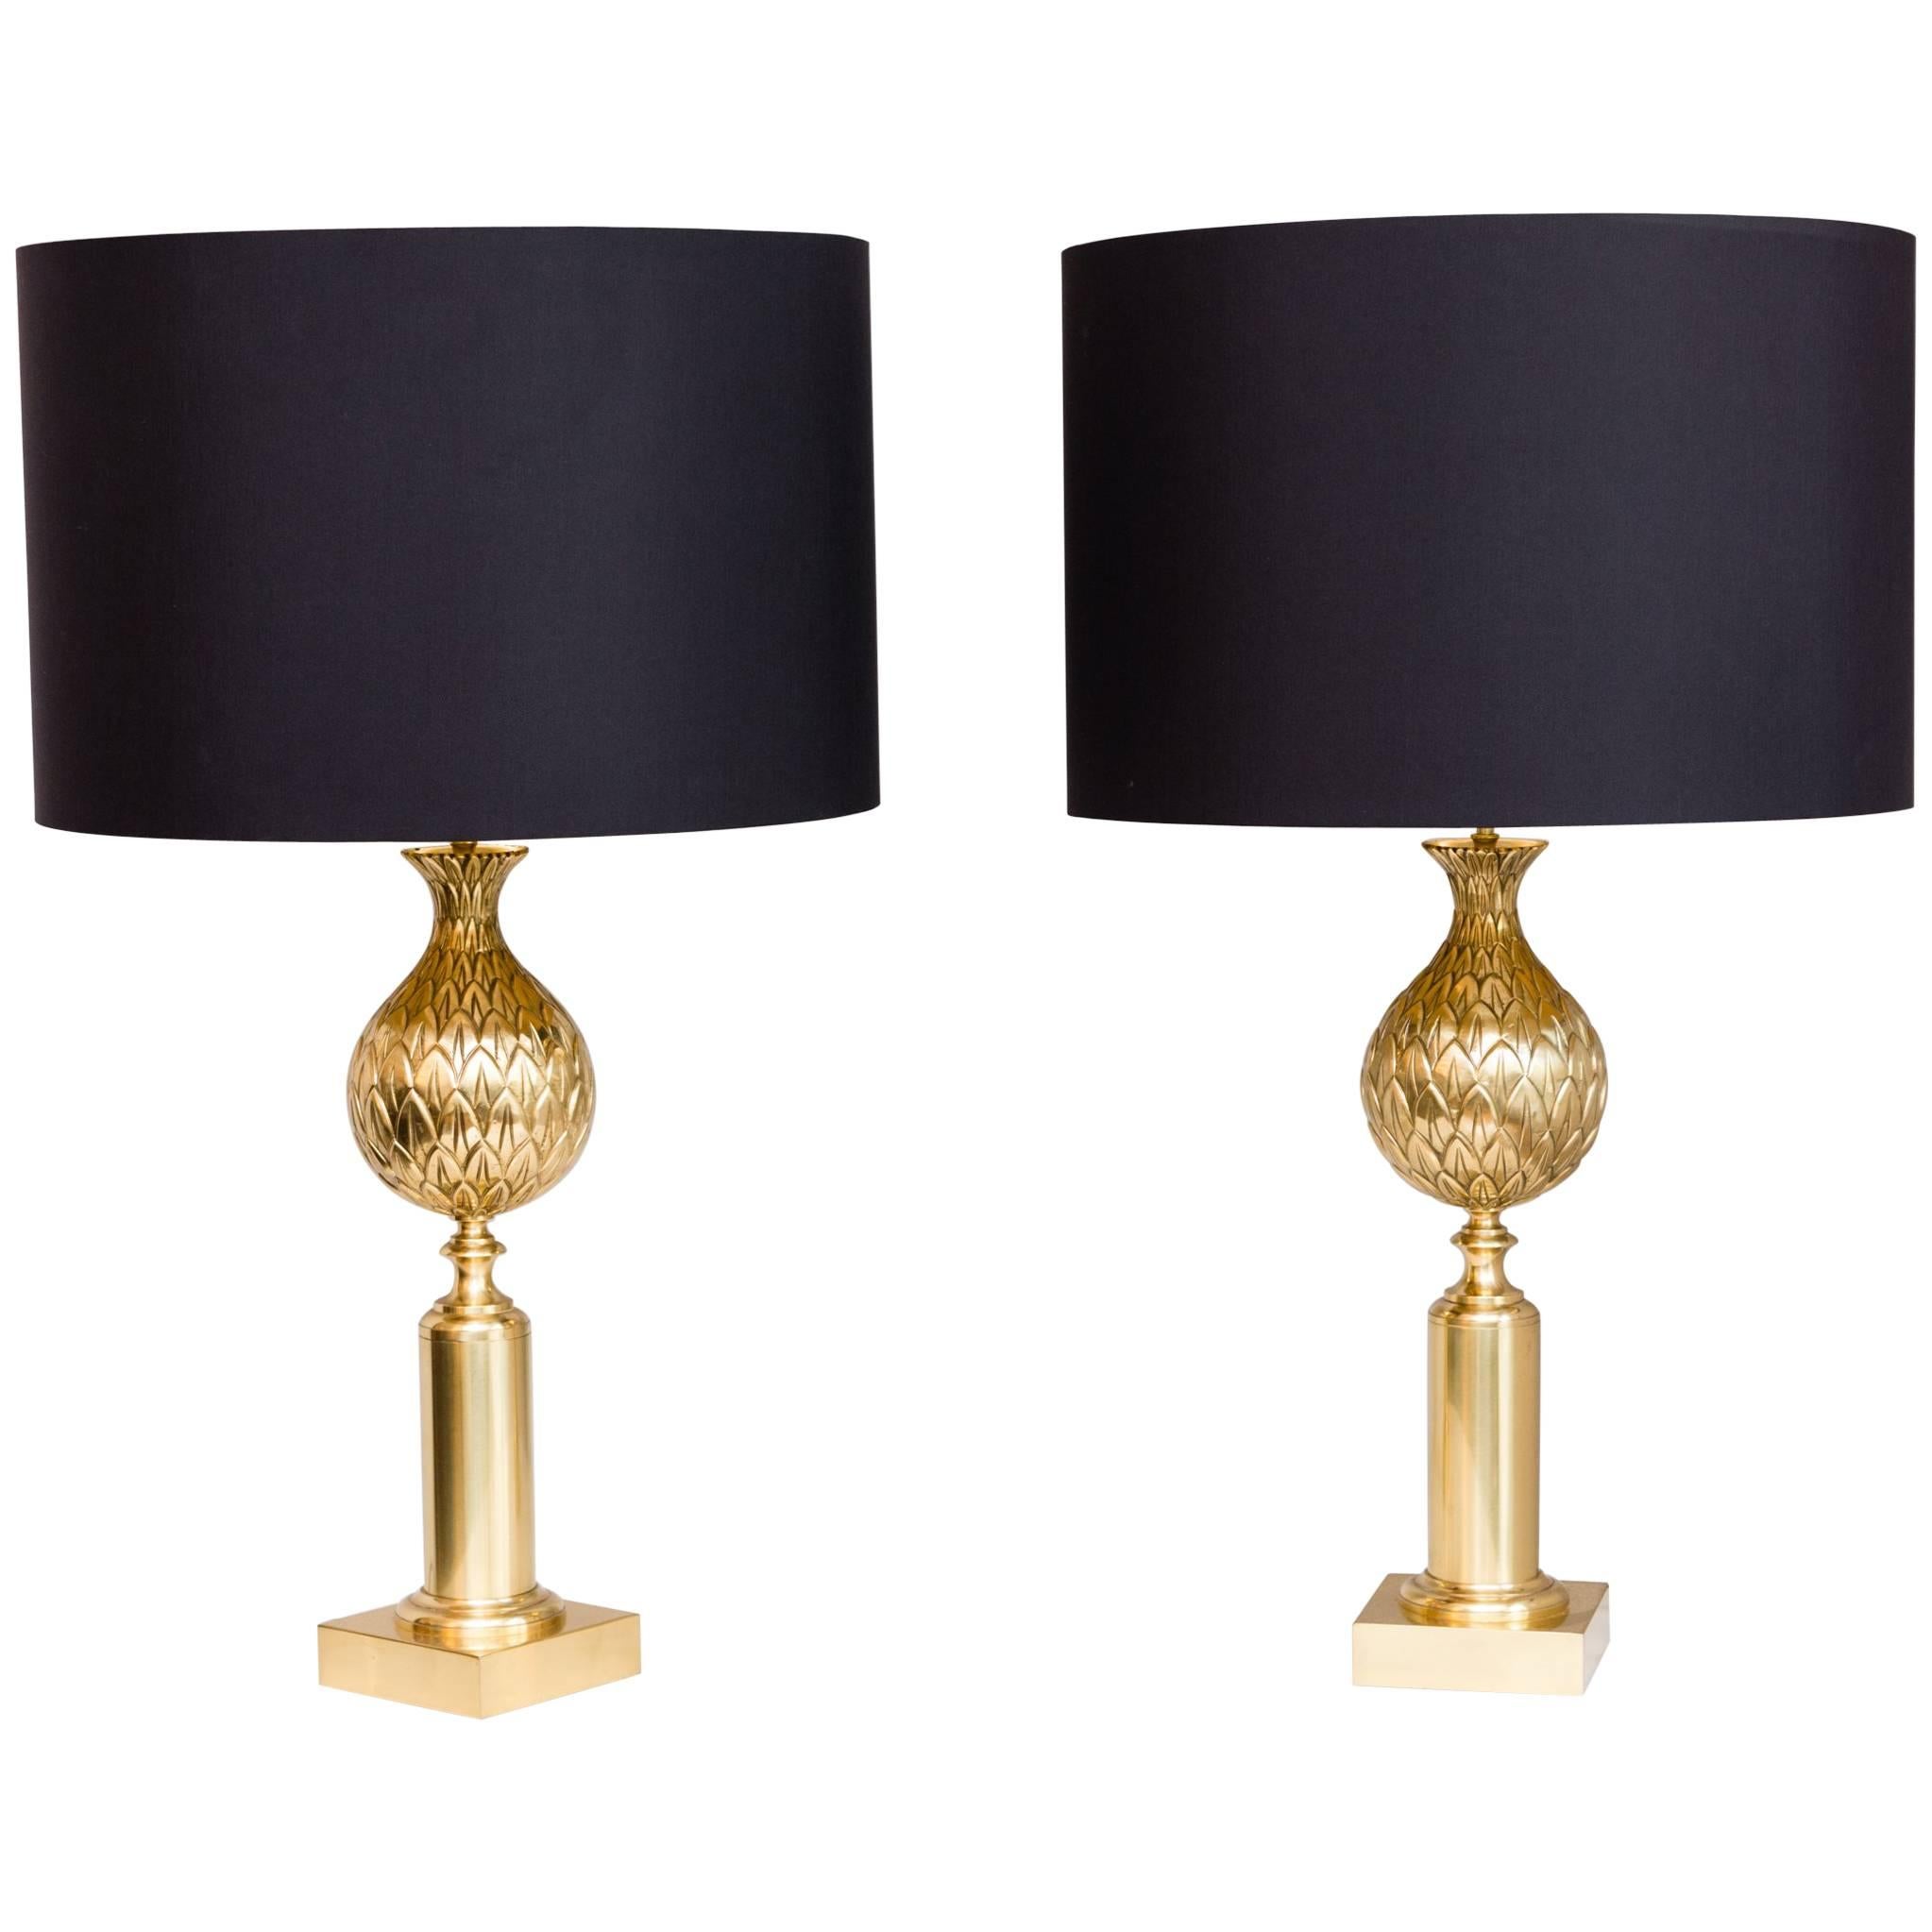 Pair of Pineapple Table Lamps by Maison Charles, France, circa 1970 For Sale